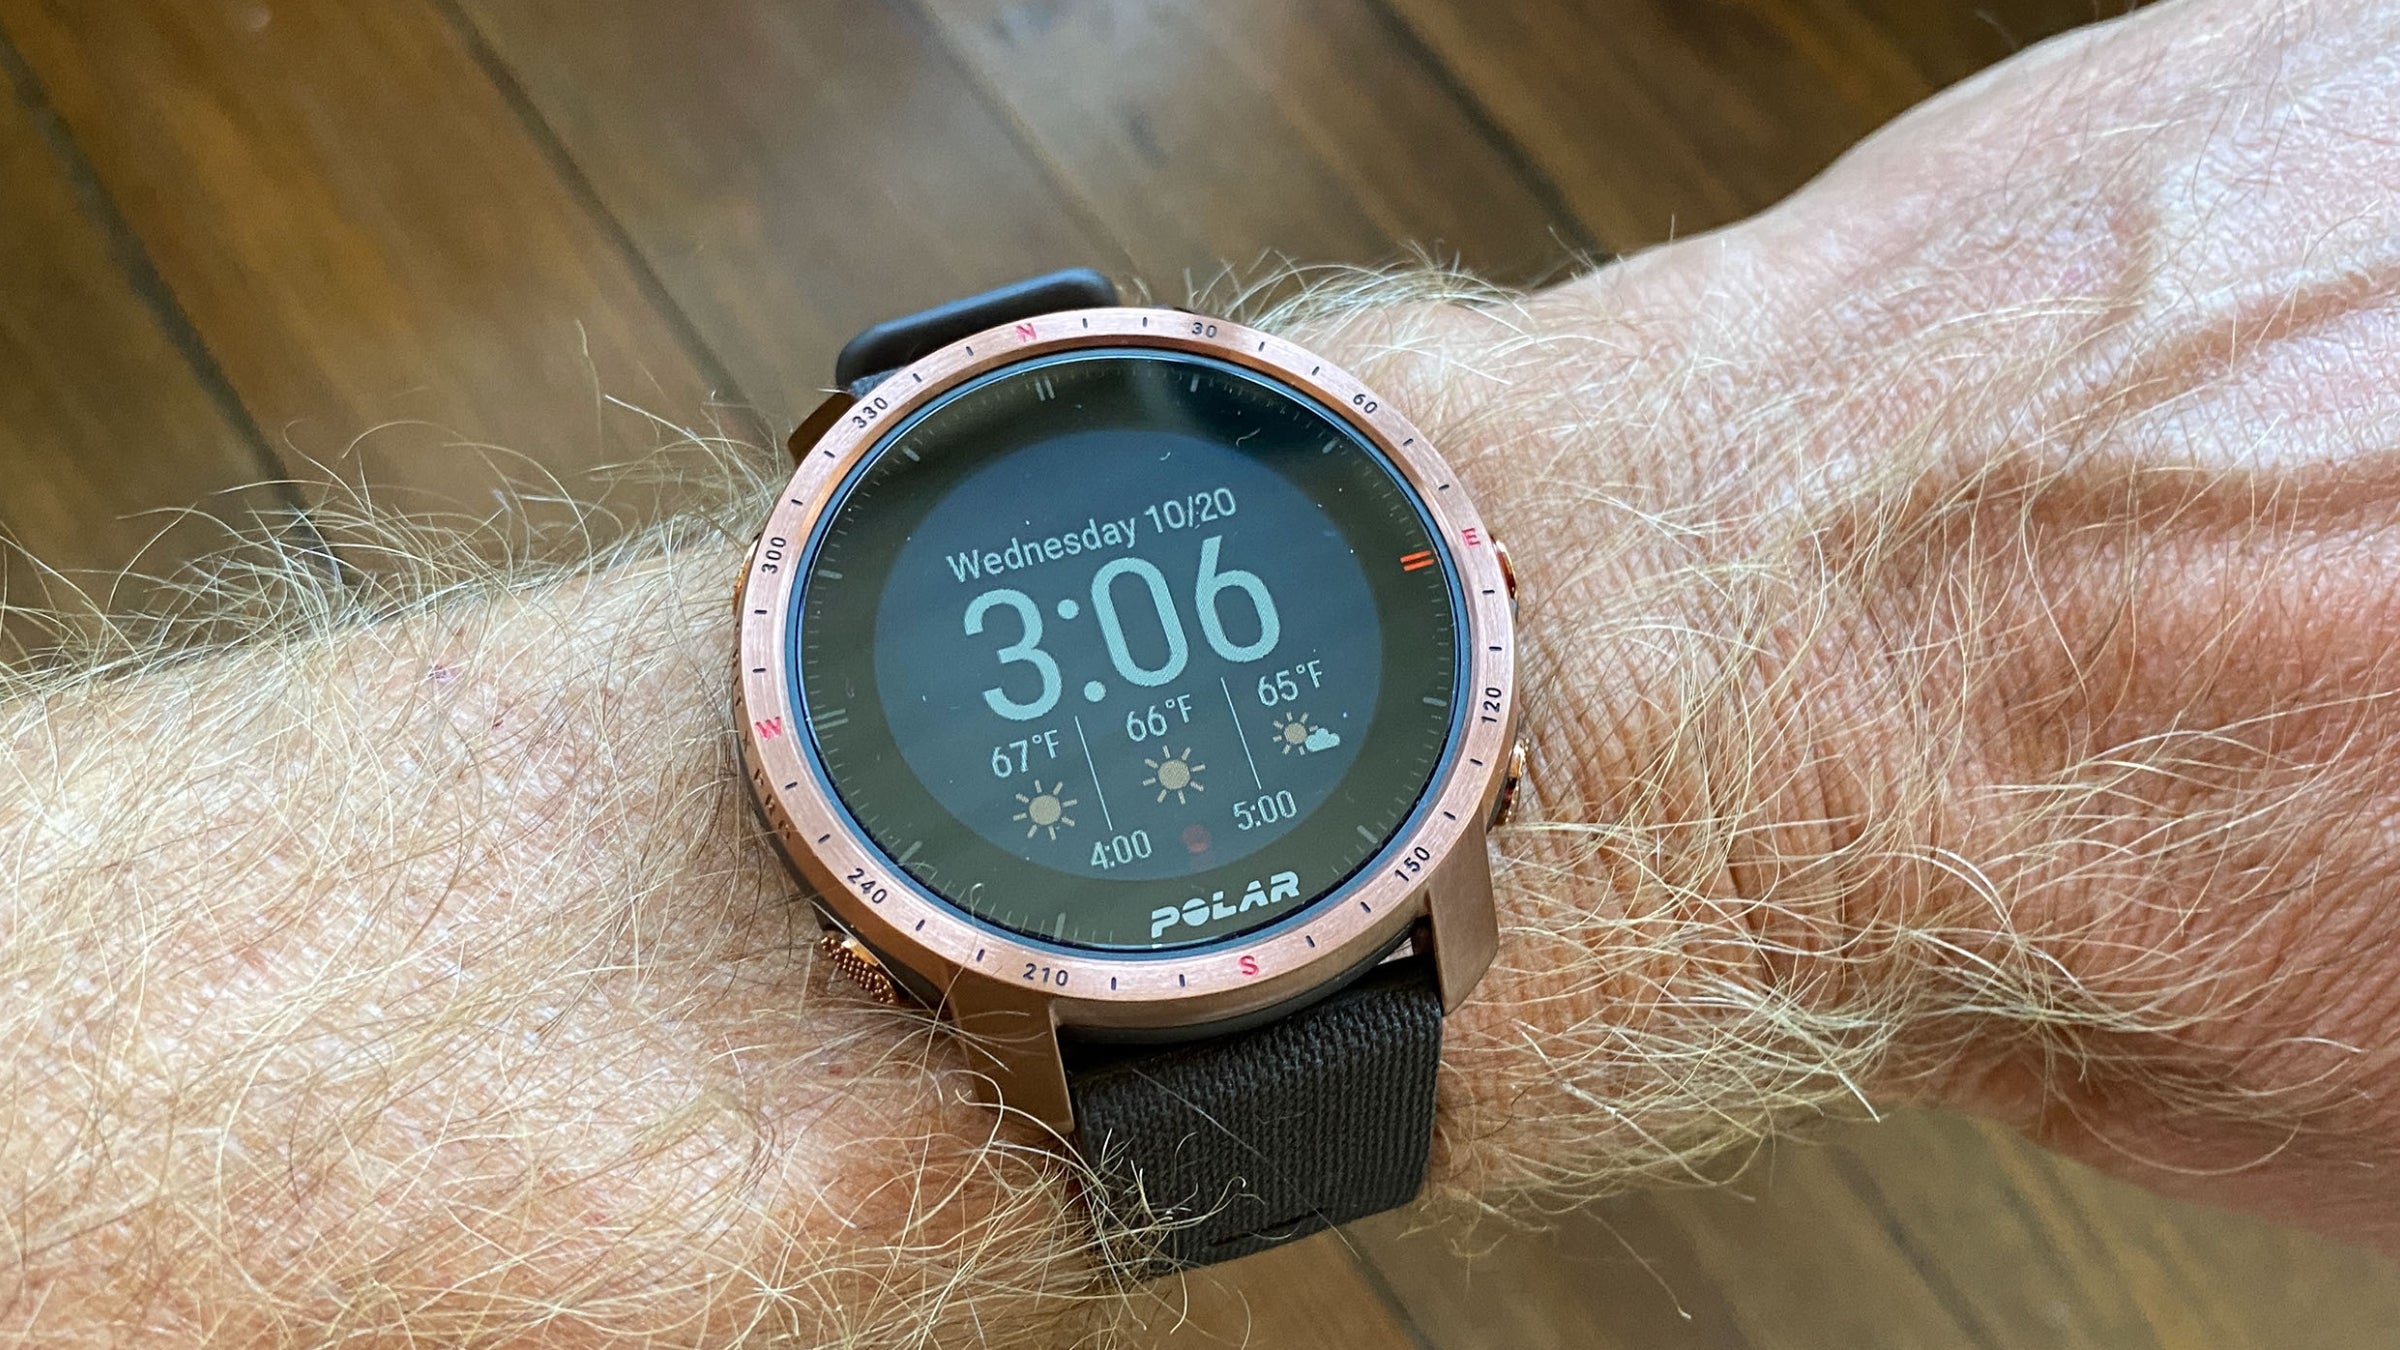 Polar's new software makes me (almost) want to switch from Garmin